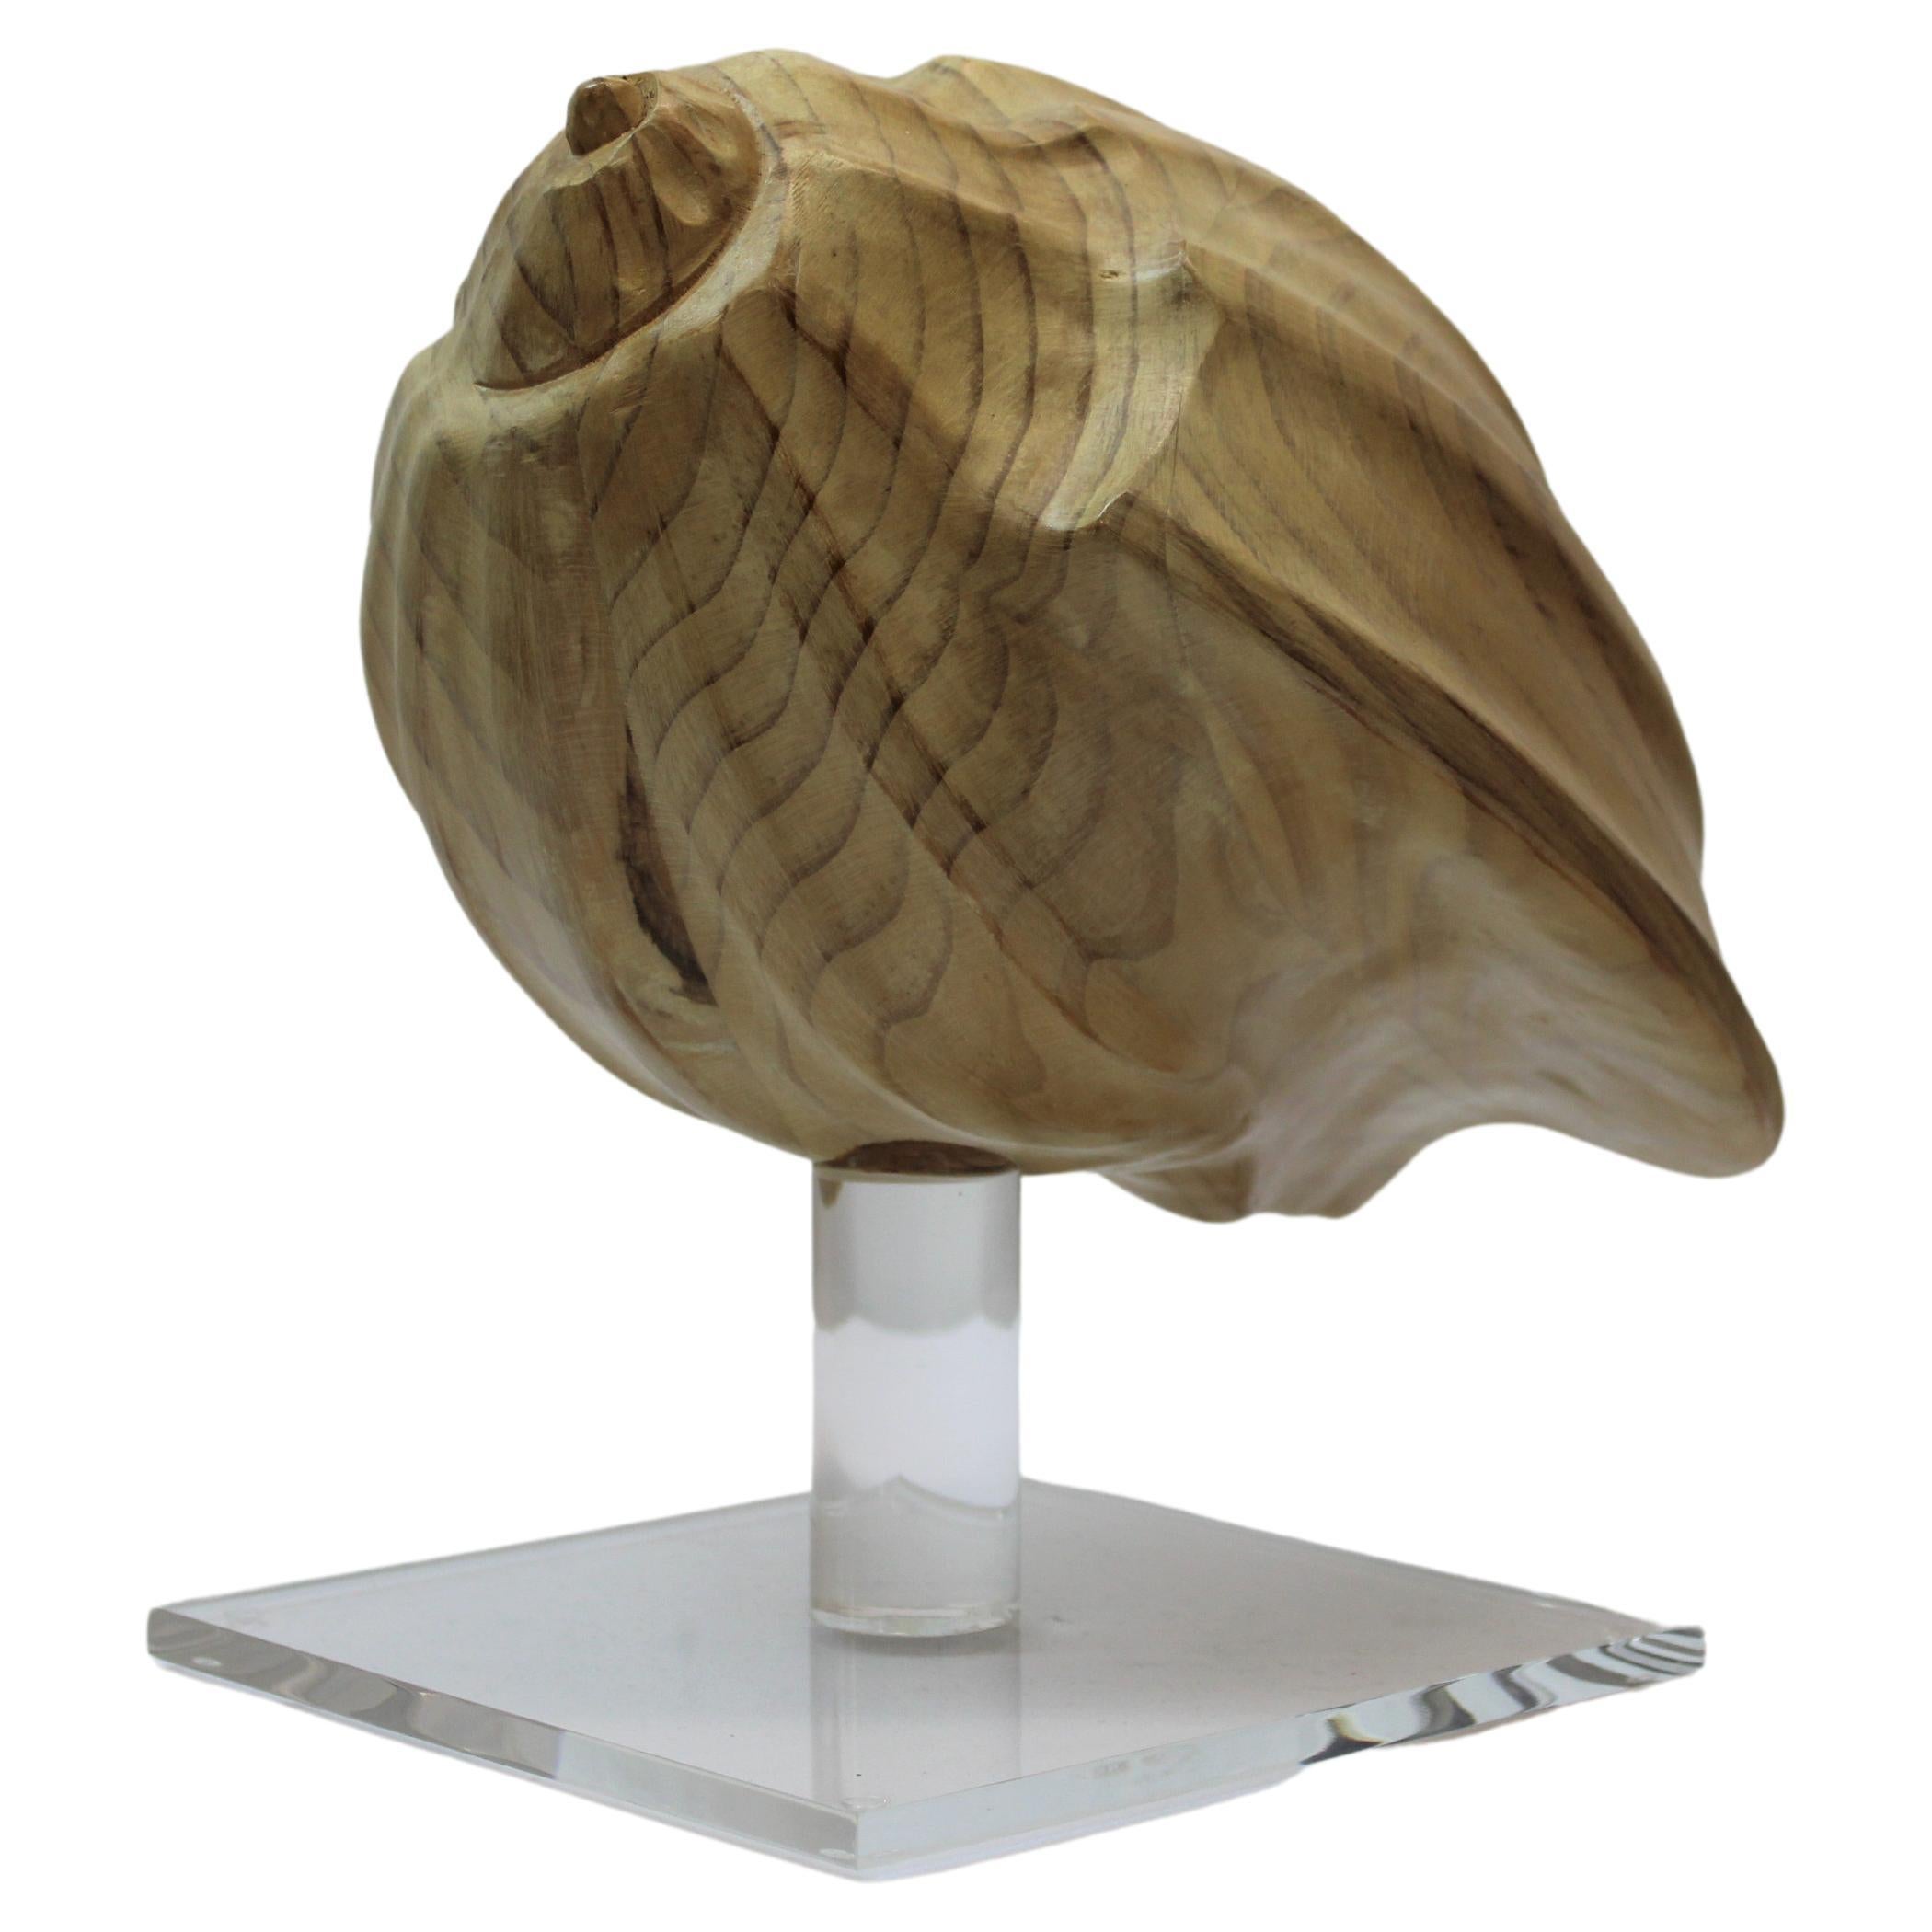 Carved Wood Conch Shell on Lucite Base